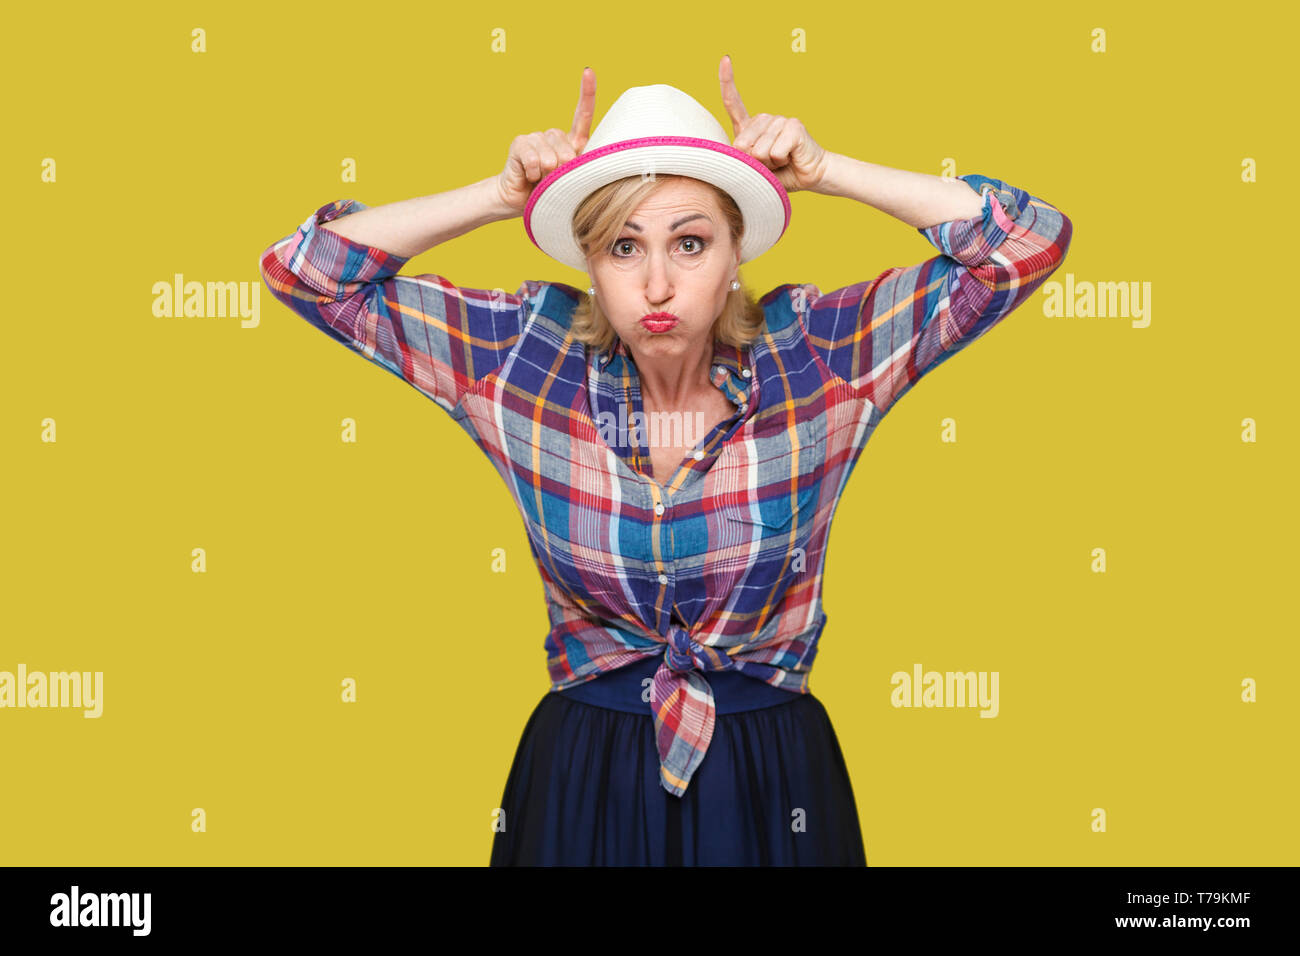 Portrait of crazy comic modern stylish mature woman in casual style with white hat standing with cow horns on head with hands and looking at camera. i Stock Photo